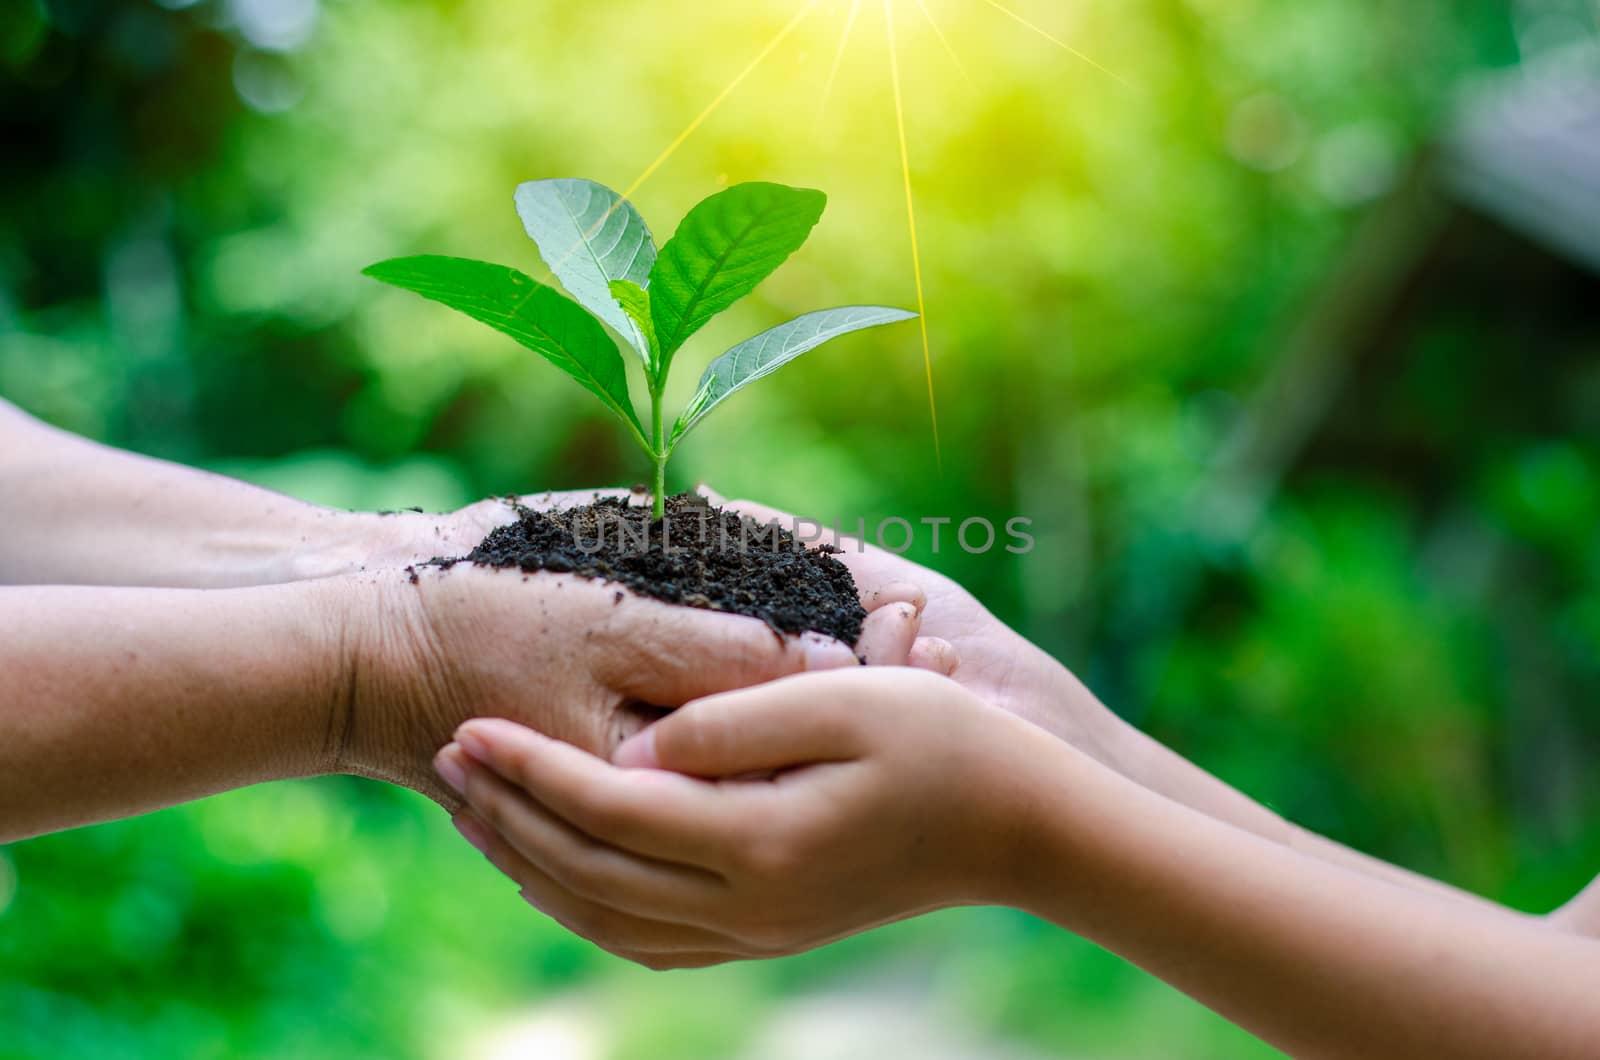 Adults Baby Hand tree environment Earth Day In the hands of trees growing seedlings. Bokeh green Background Female hand holding tree on nature field grass Forest conservation concept by sarayut_thaneerat